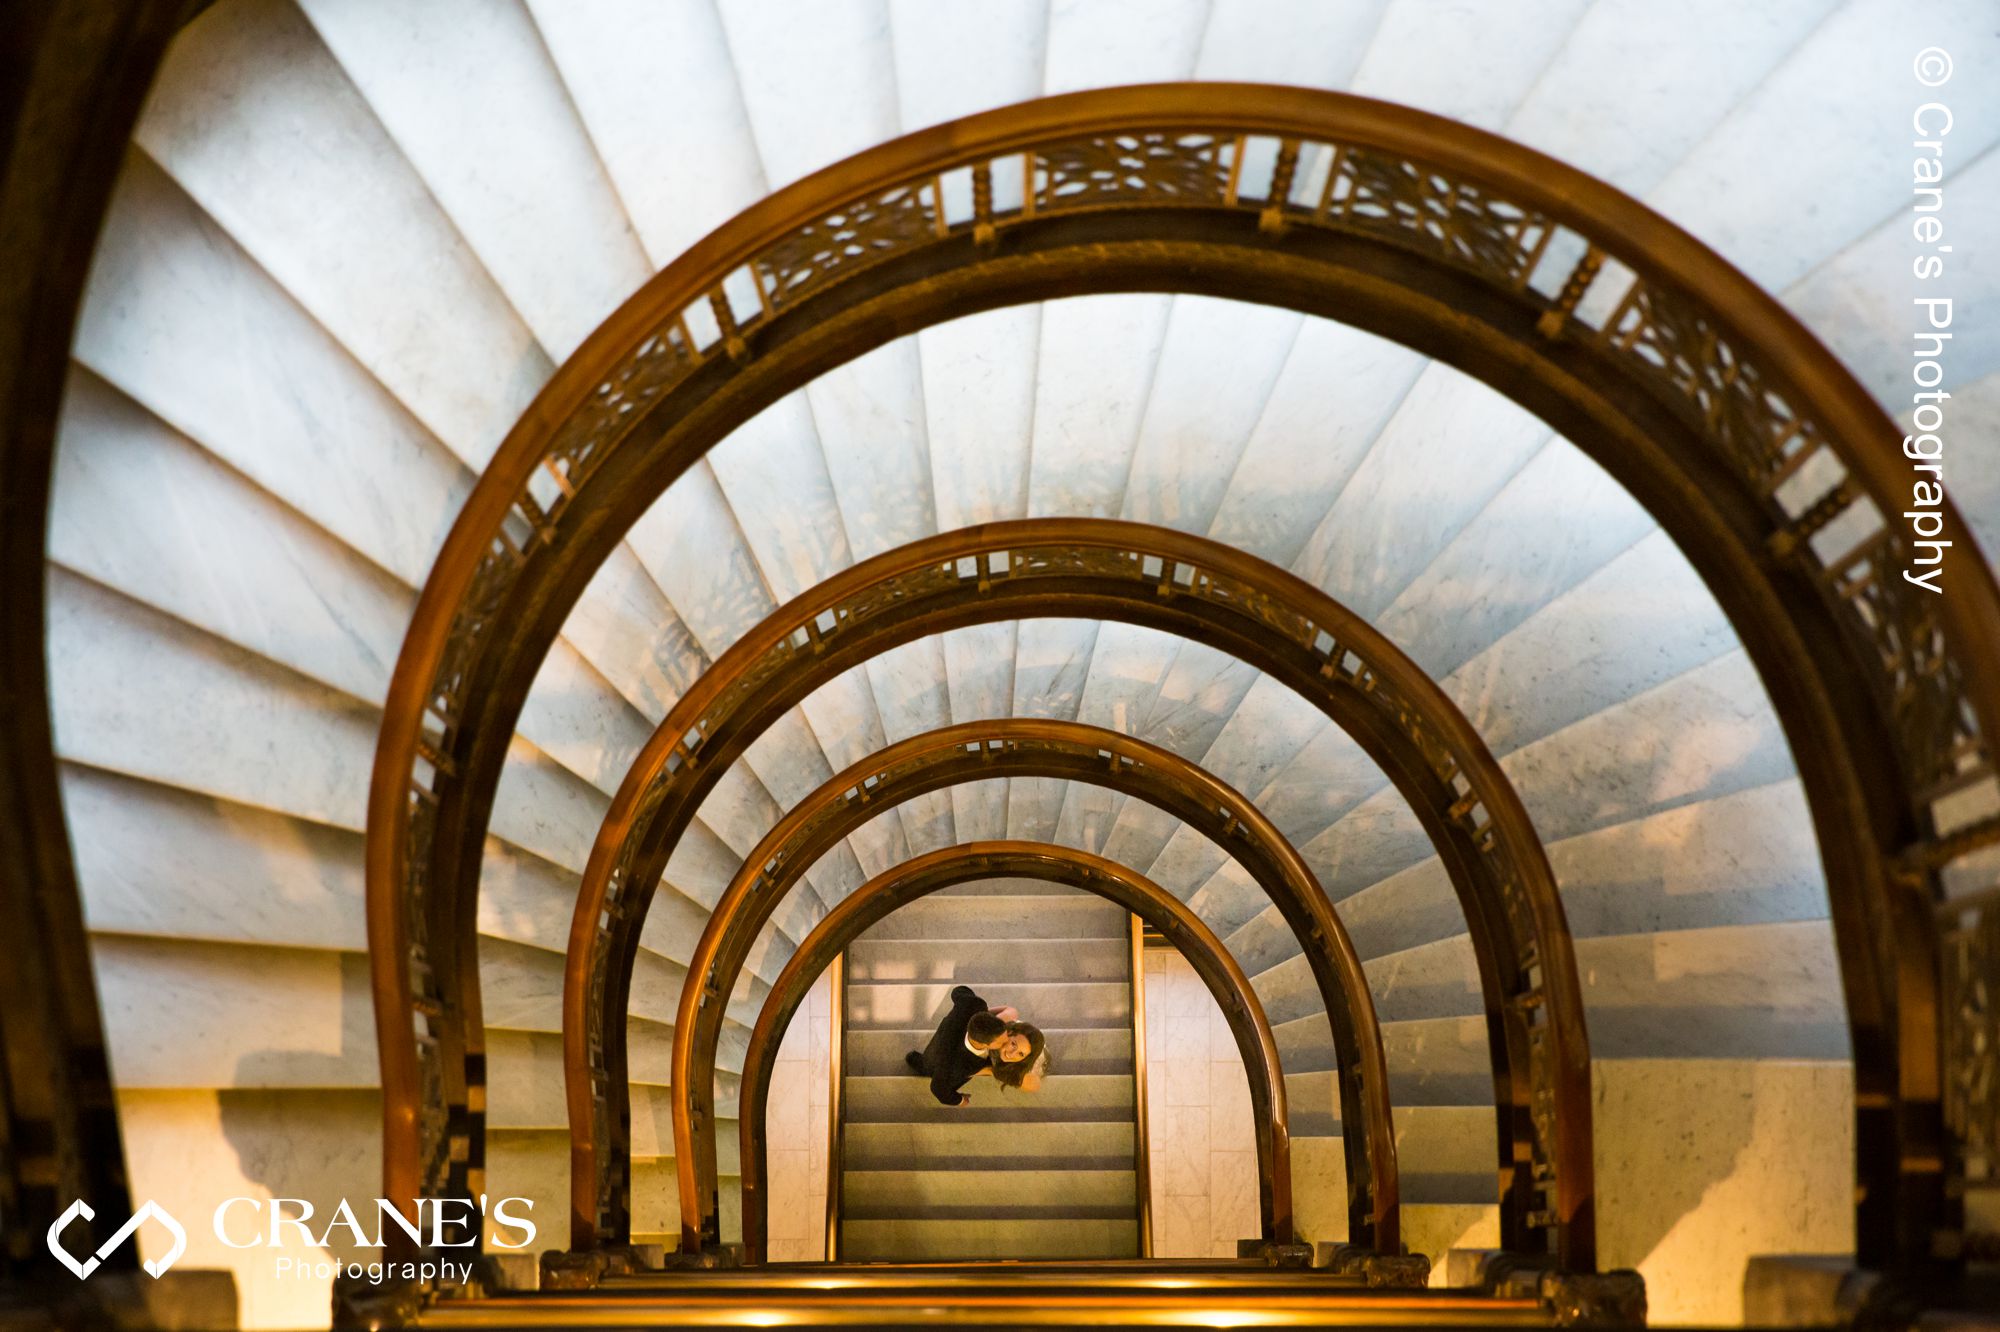 The spiral staircase at the Rookery in Chicago engagement photo